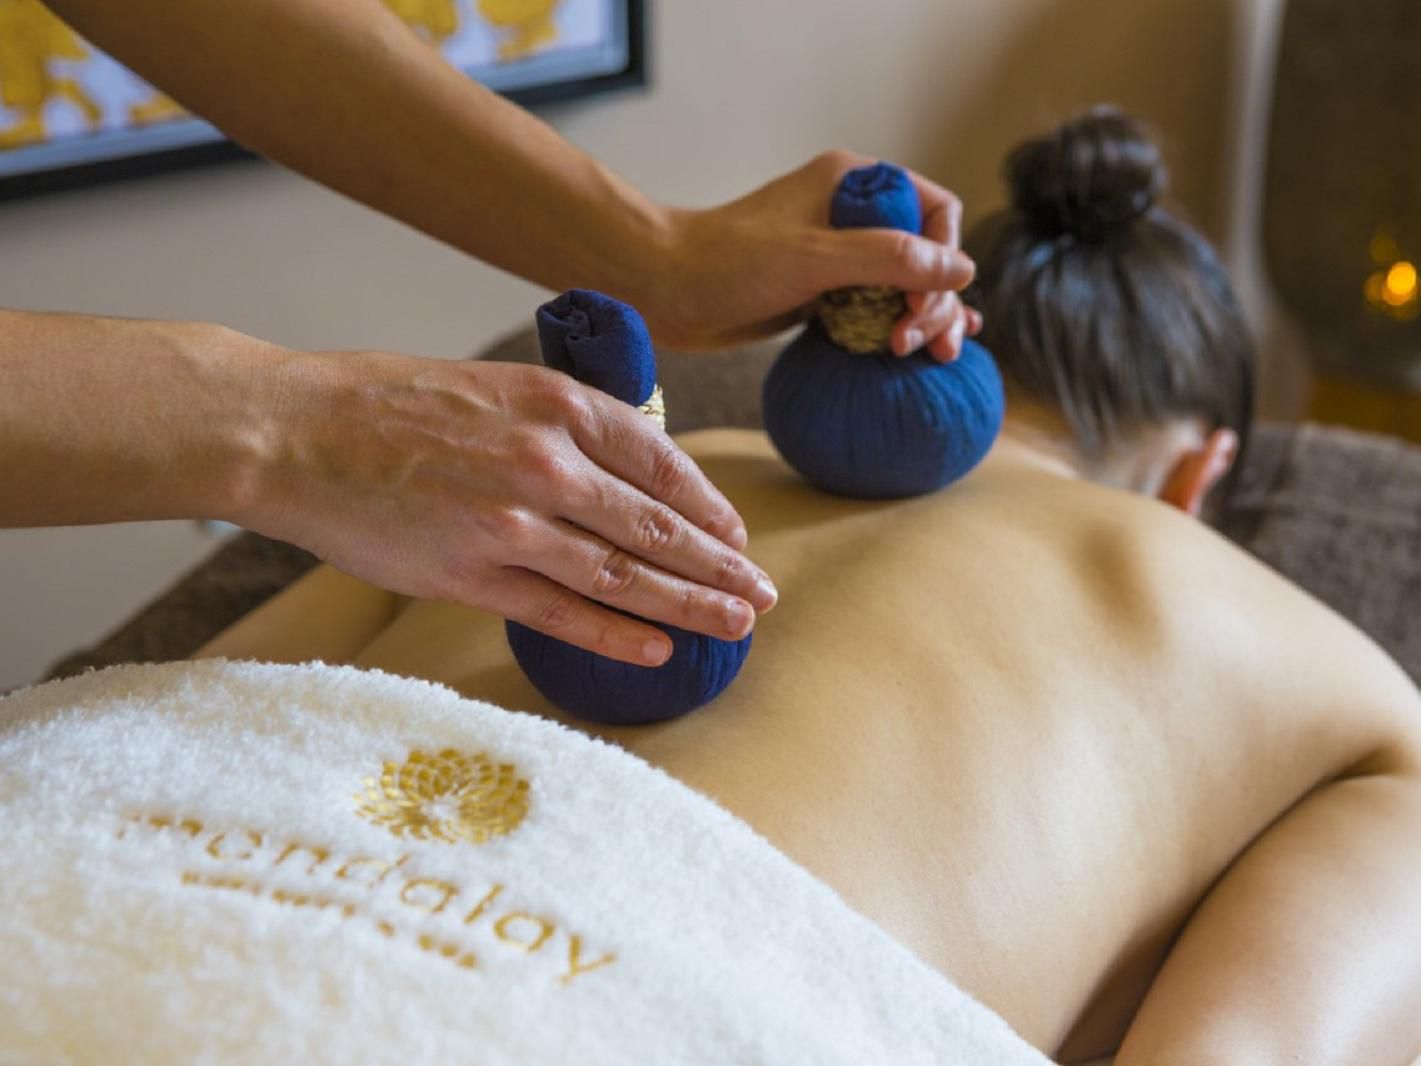 Either in business or leisure, we all need the time to relax and disconnect from the day-to-day rush.
The Mandalay Spa offers a wide variety of massages and treatments for you to pamper yourself in a moment just dedicated to your well-being!
Call us and let a dedicated team guide you through the spa menu to choose the perfect fit for you!